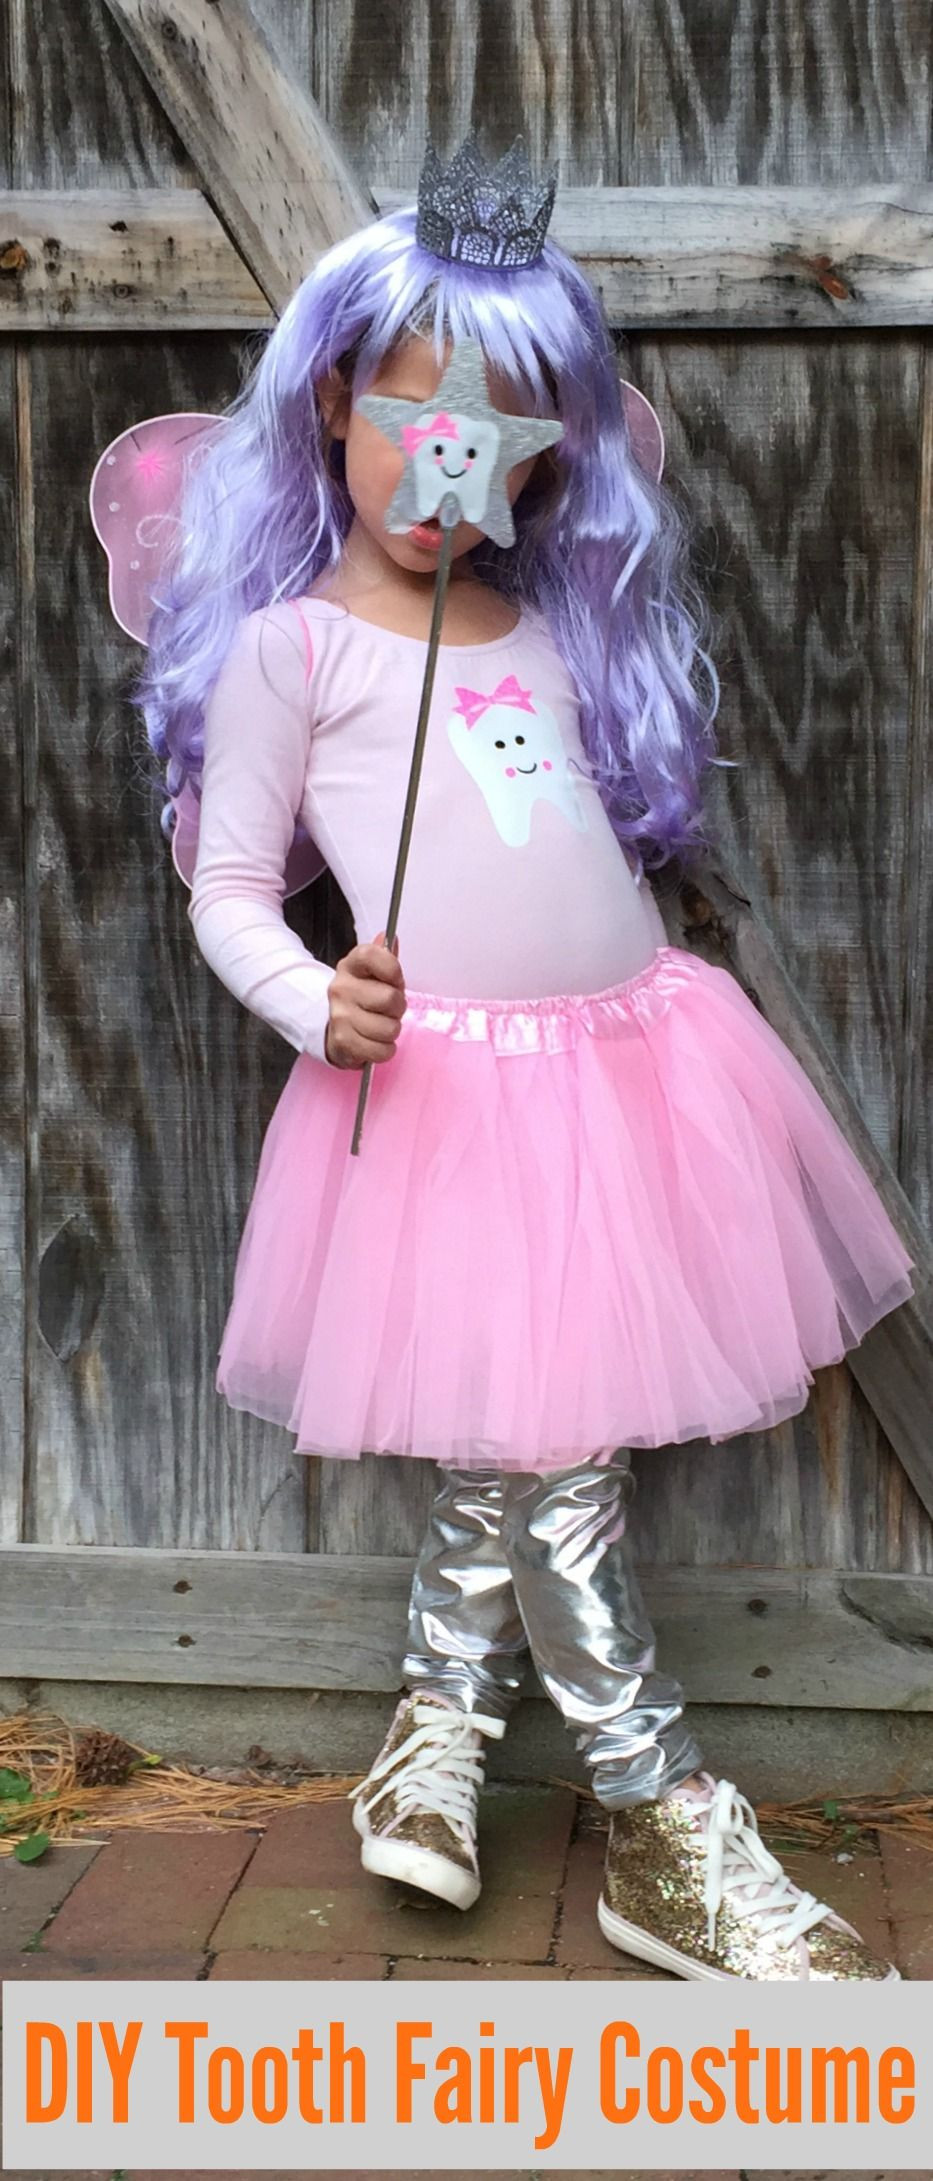 DIY Tooth Fairy Costume
 Easy DIY Halloween Costume for Kids The Tooth Fairy